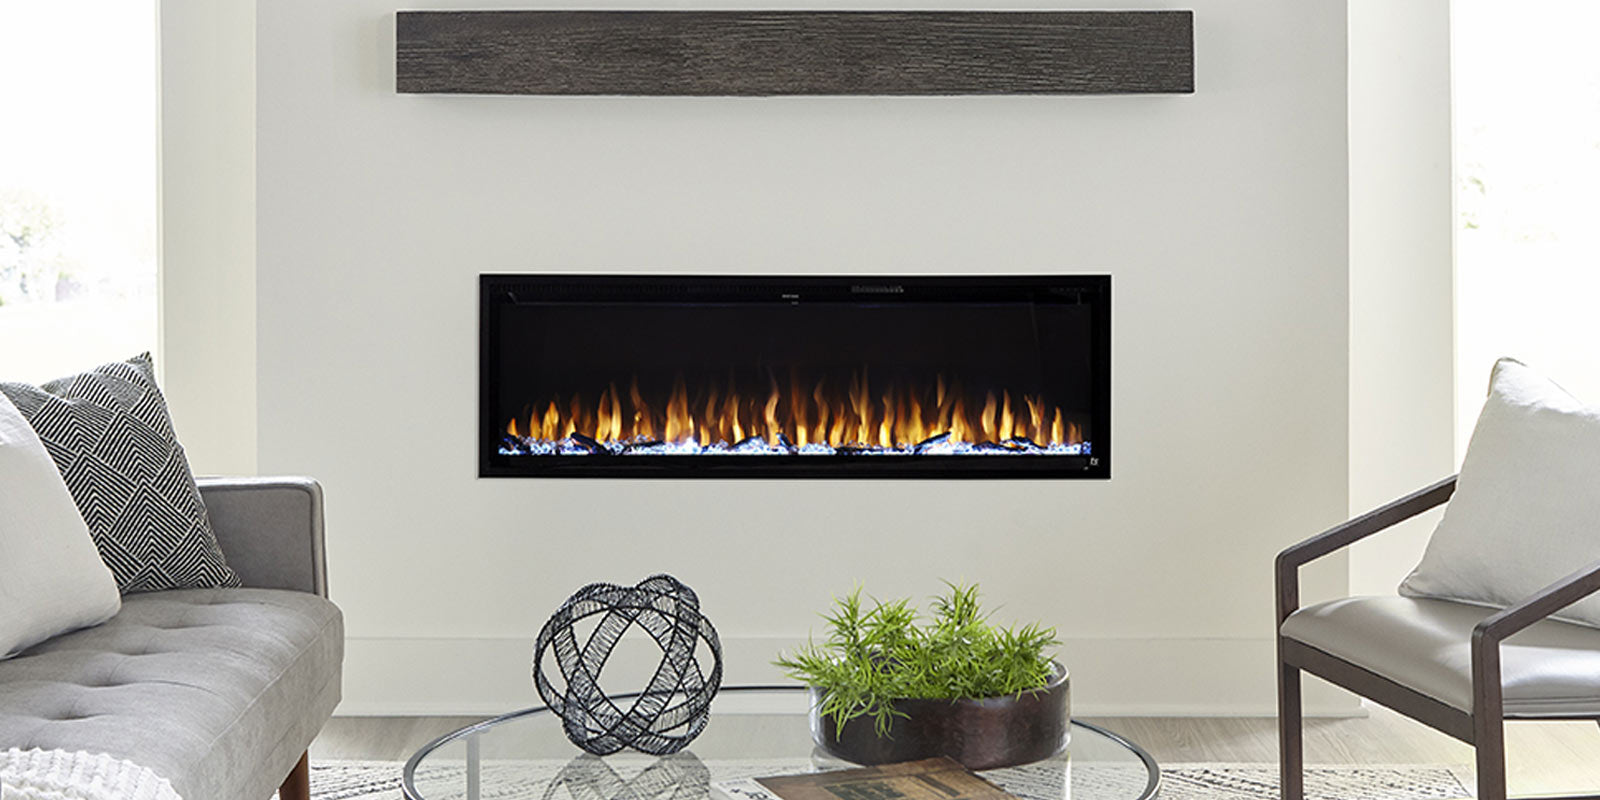 Touchstone Sideline Elite Smart Electric Fireplace in white accent wall with gray couch